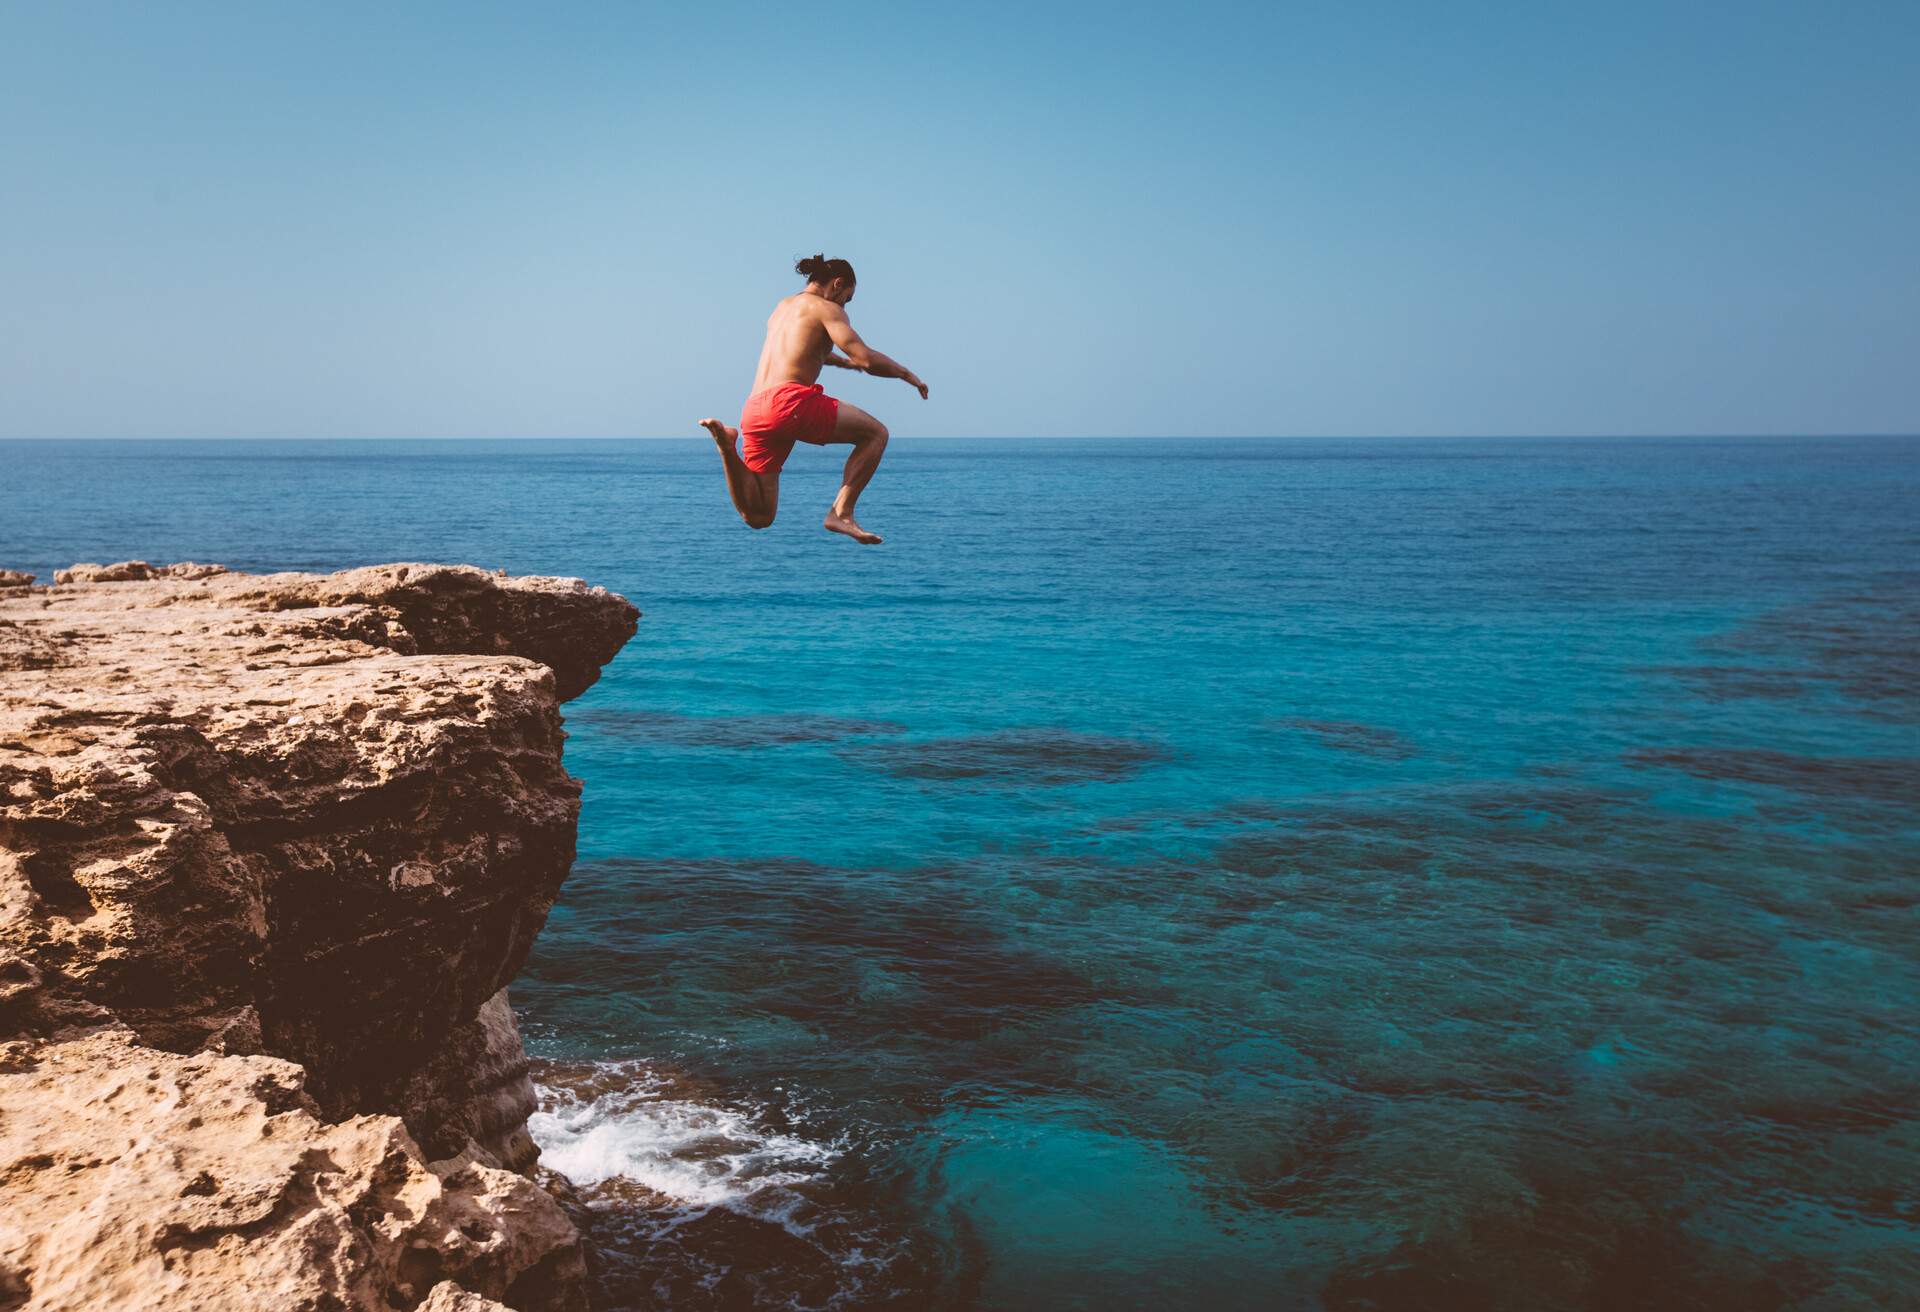 Brave man diving from high cliff into blue sea waters on tropical island summer adventure